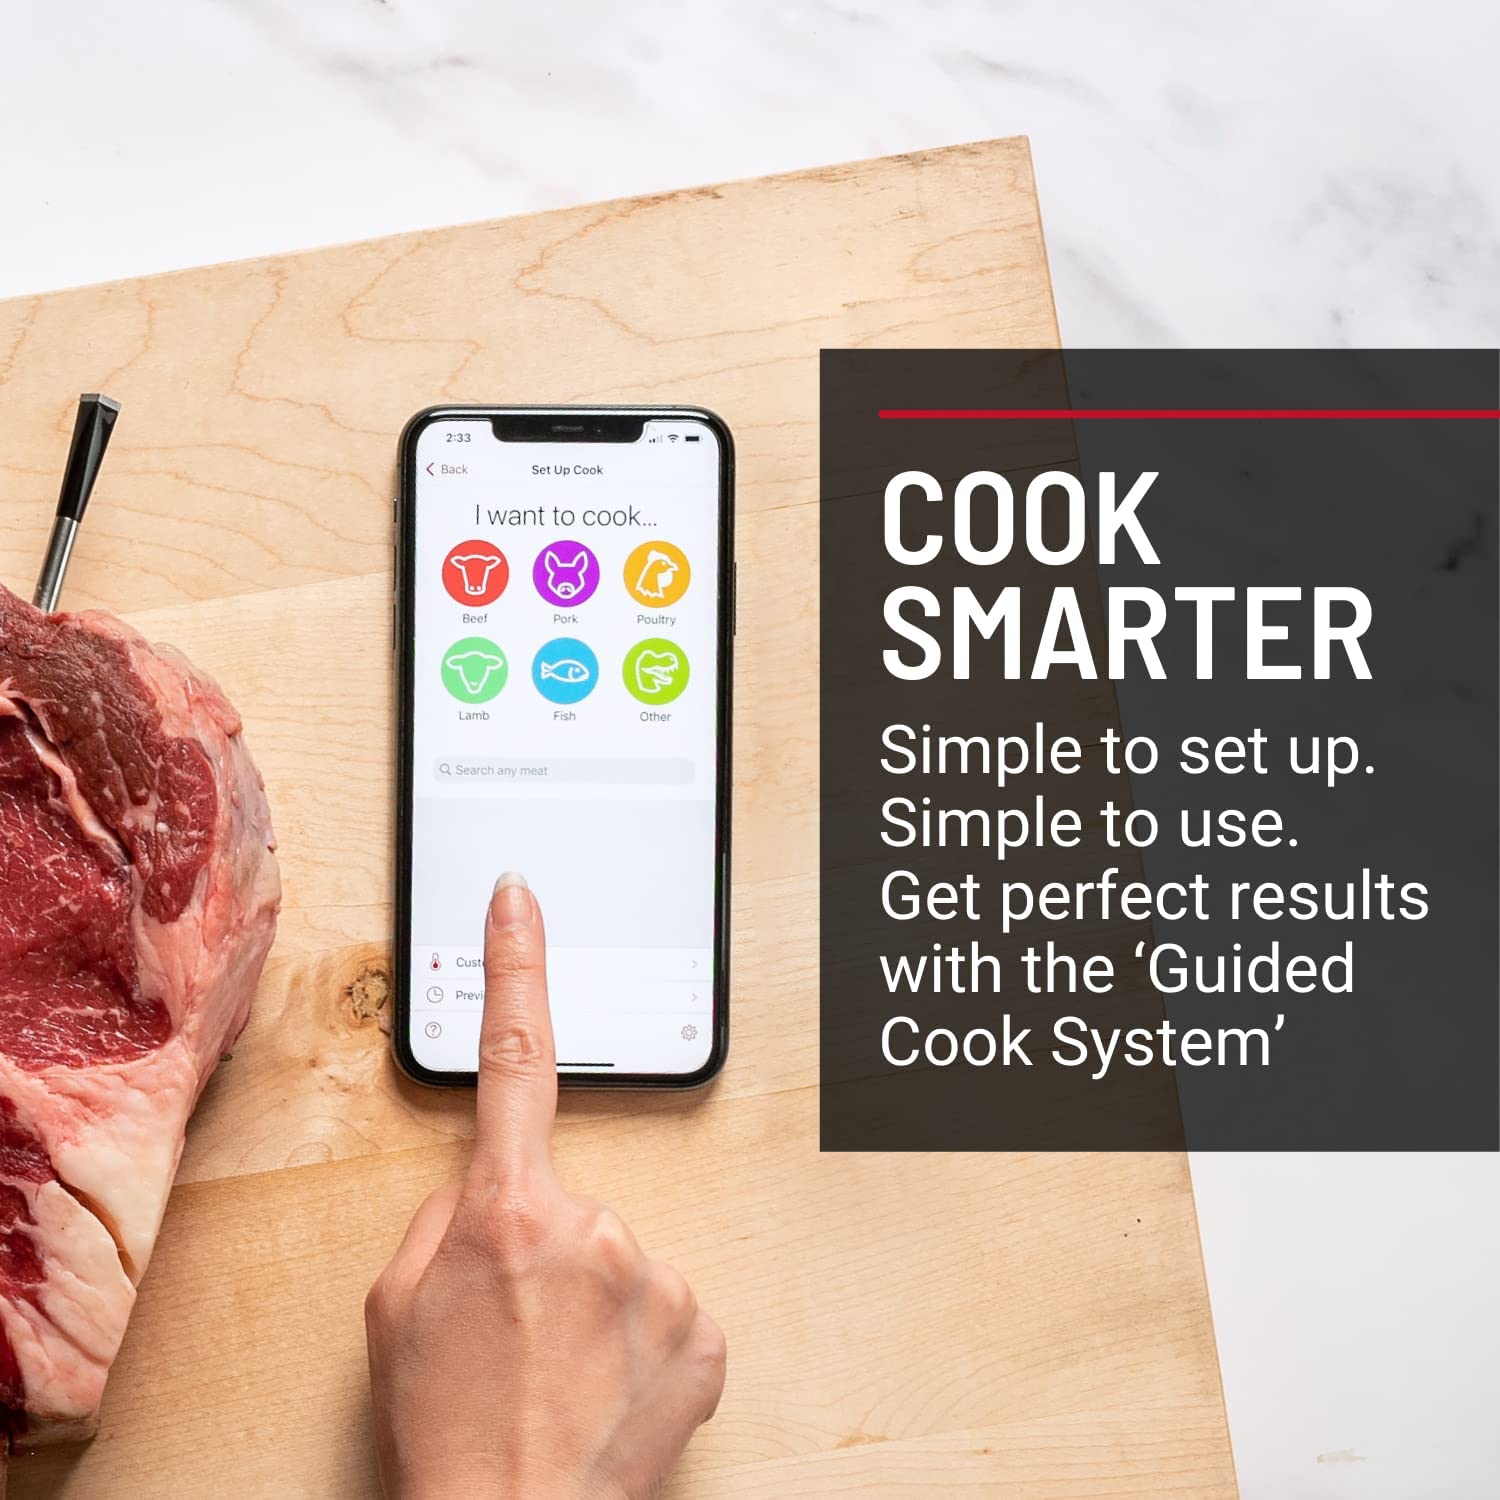 Original MEATER: Wireless Smart Meat Thermometer | 33ft Wireless Range | for The Oven, Grill, BBQ, Kitchen | iOS & Android App | Apple Watch, Alexa Compatible | Dishwasher Safe